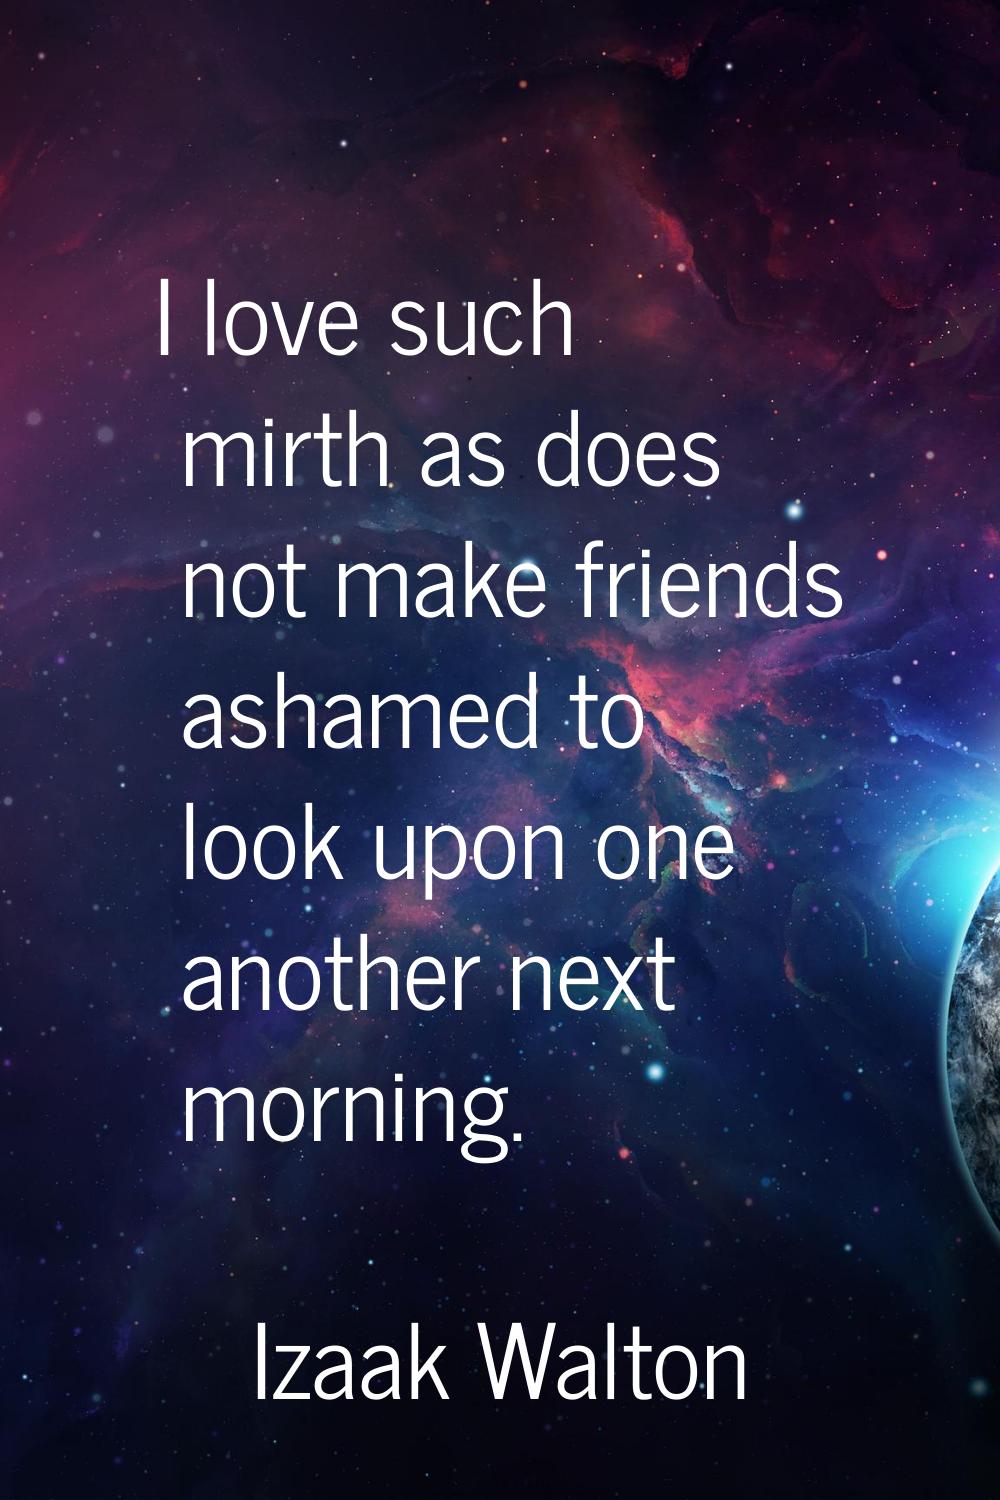 I love such mirth as does not make friends ashamed to look upon one another next morning.